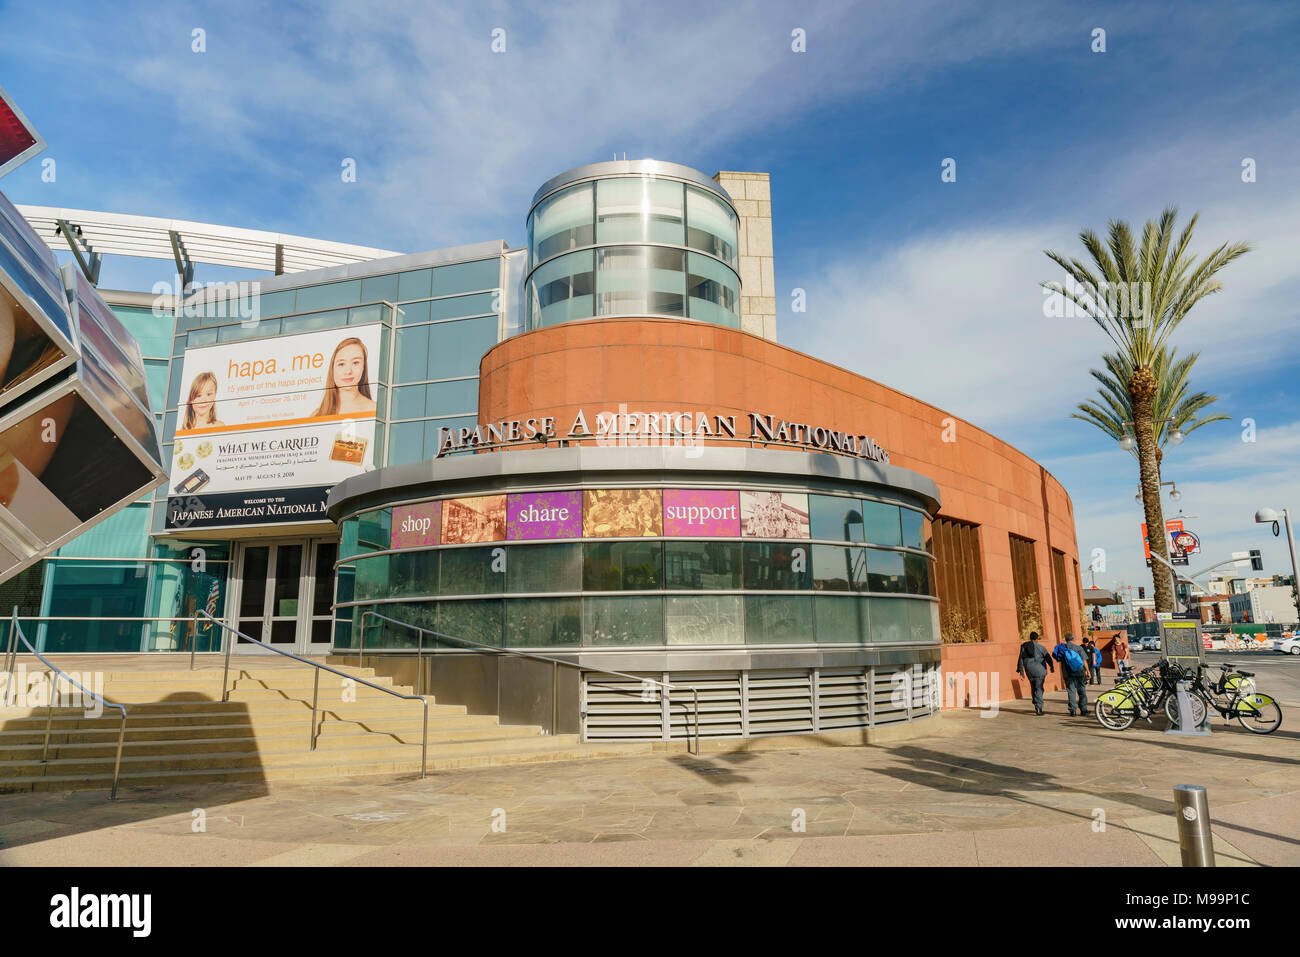 Los Angeles, MAR 3: Exterior view of the Japanese American National Museum on MAR 3, 2018 at Los Angeles Stock Photo